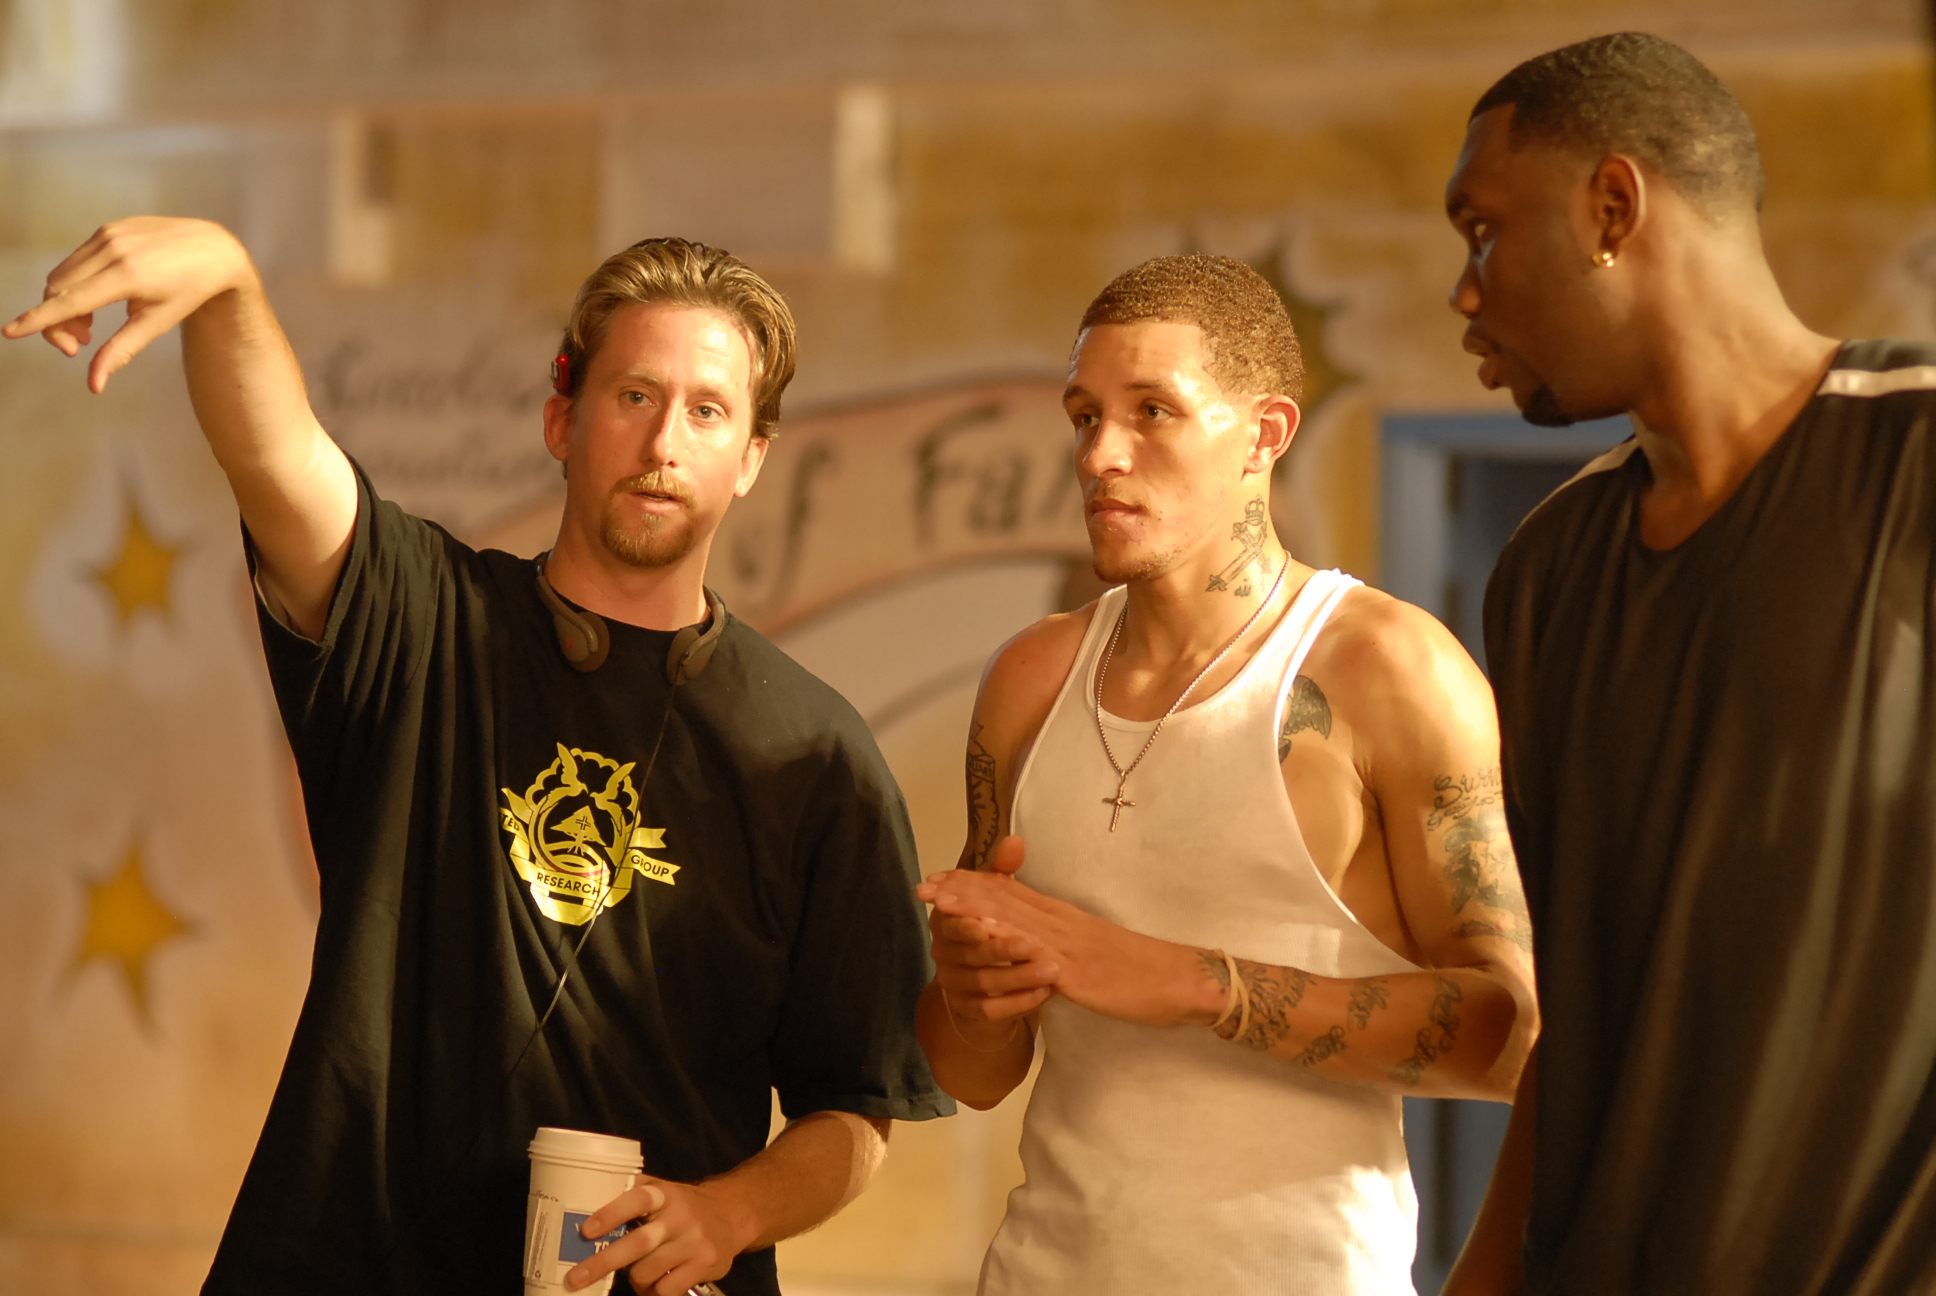 Director Brin Hill on set of BALL DON'T LIE